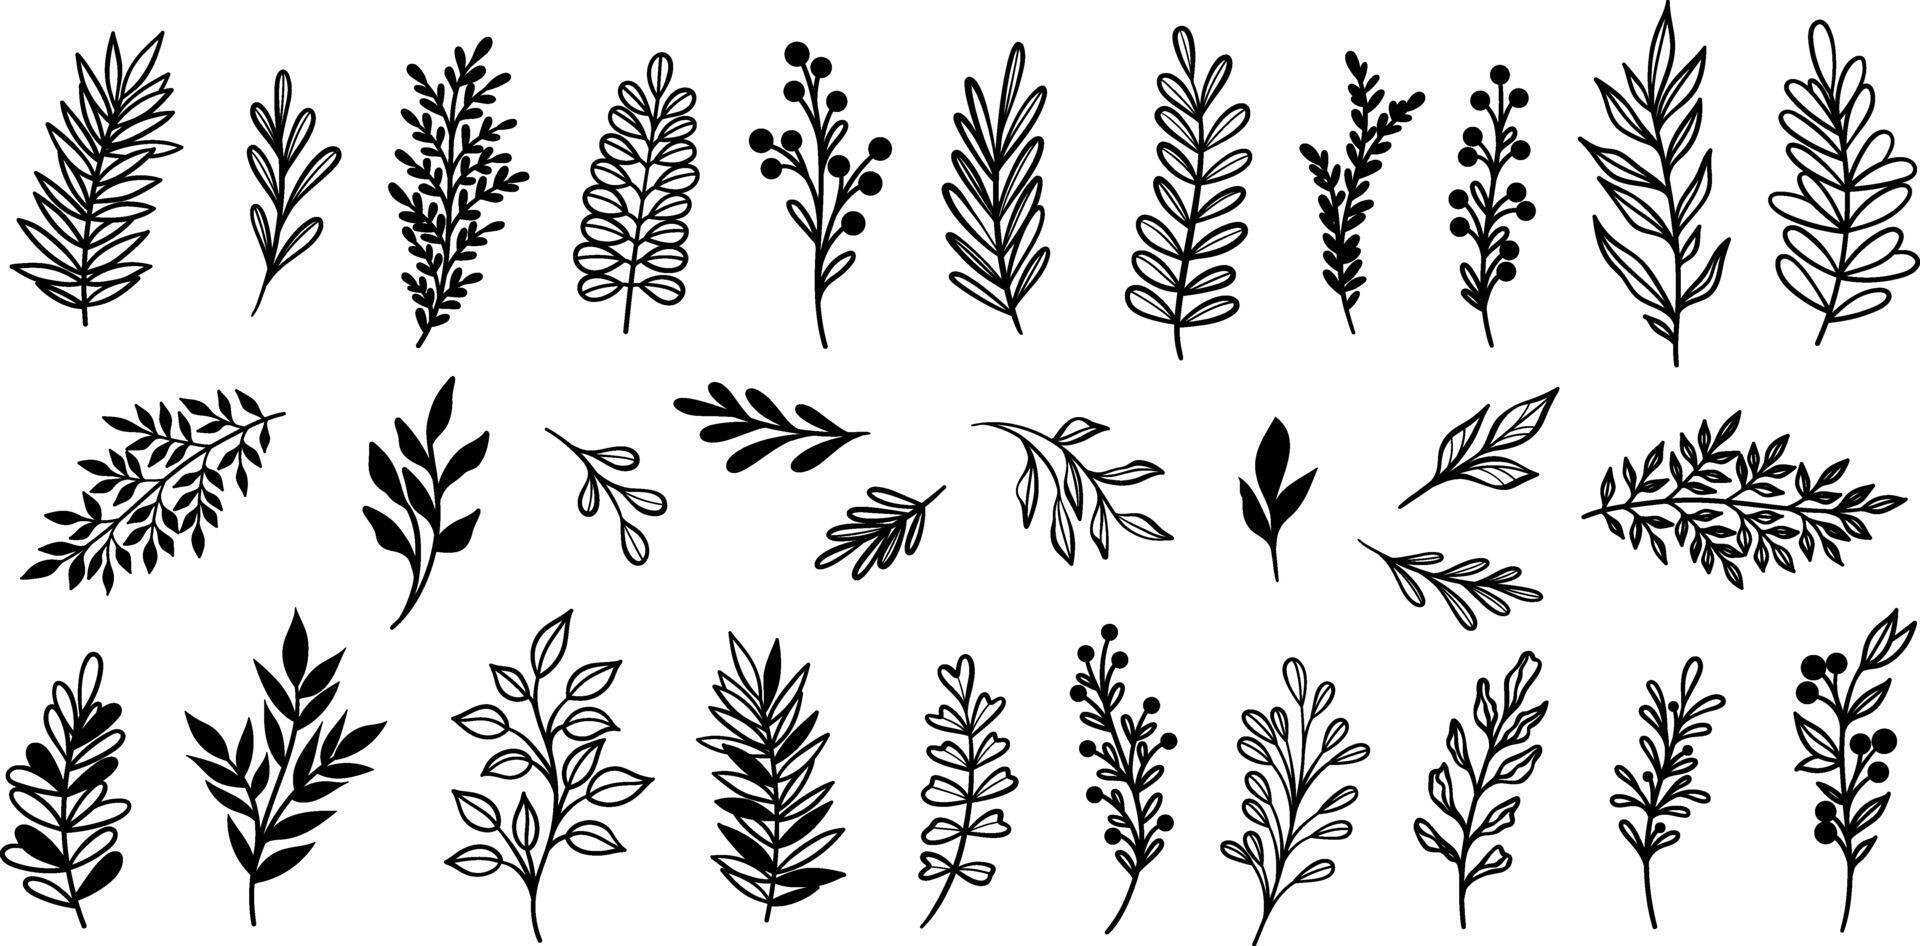 Leaf set, hand drawn leaves, plant doodles isolated collection vector